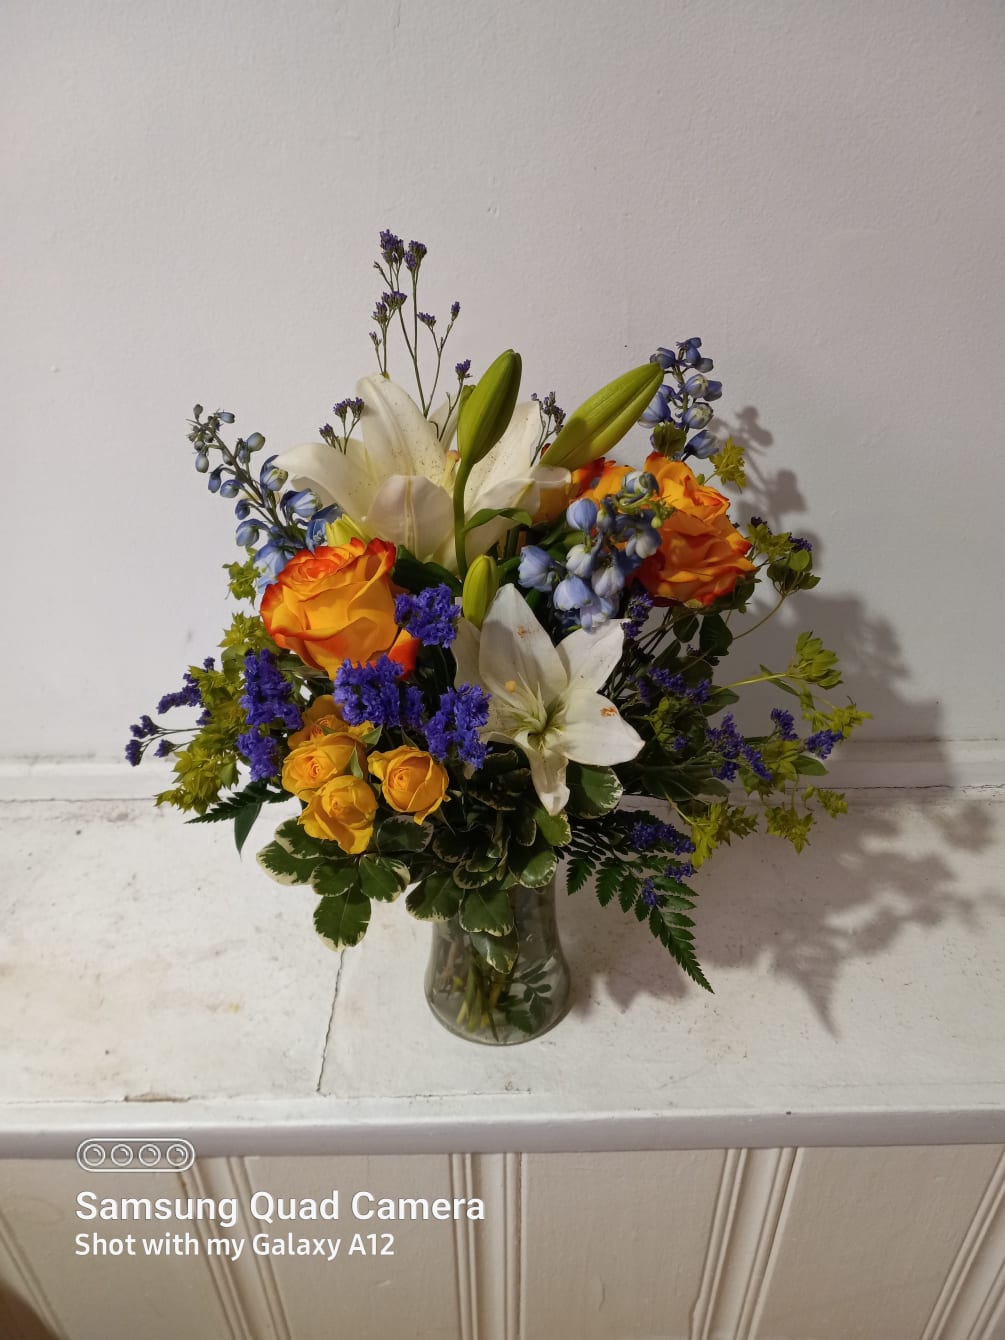 Beautiful white oriental lilies, yellow roses and blue delphinium with greenery and